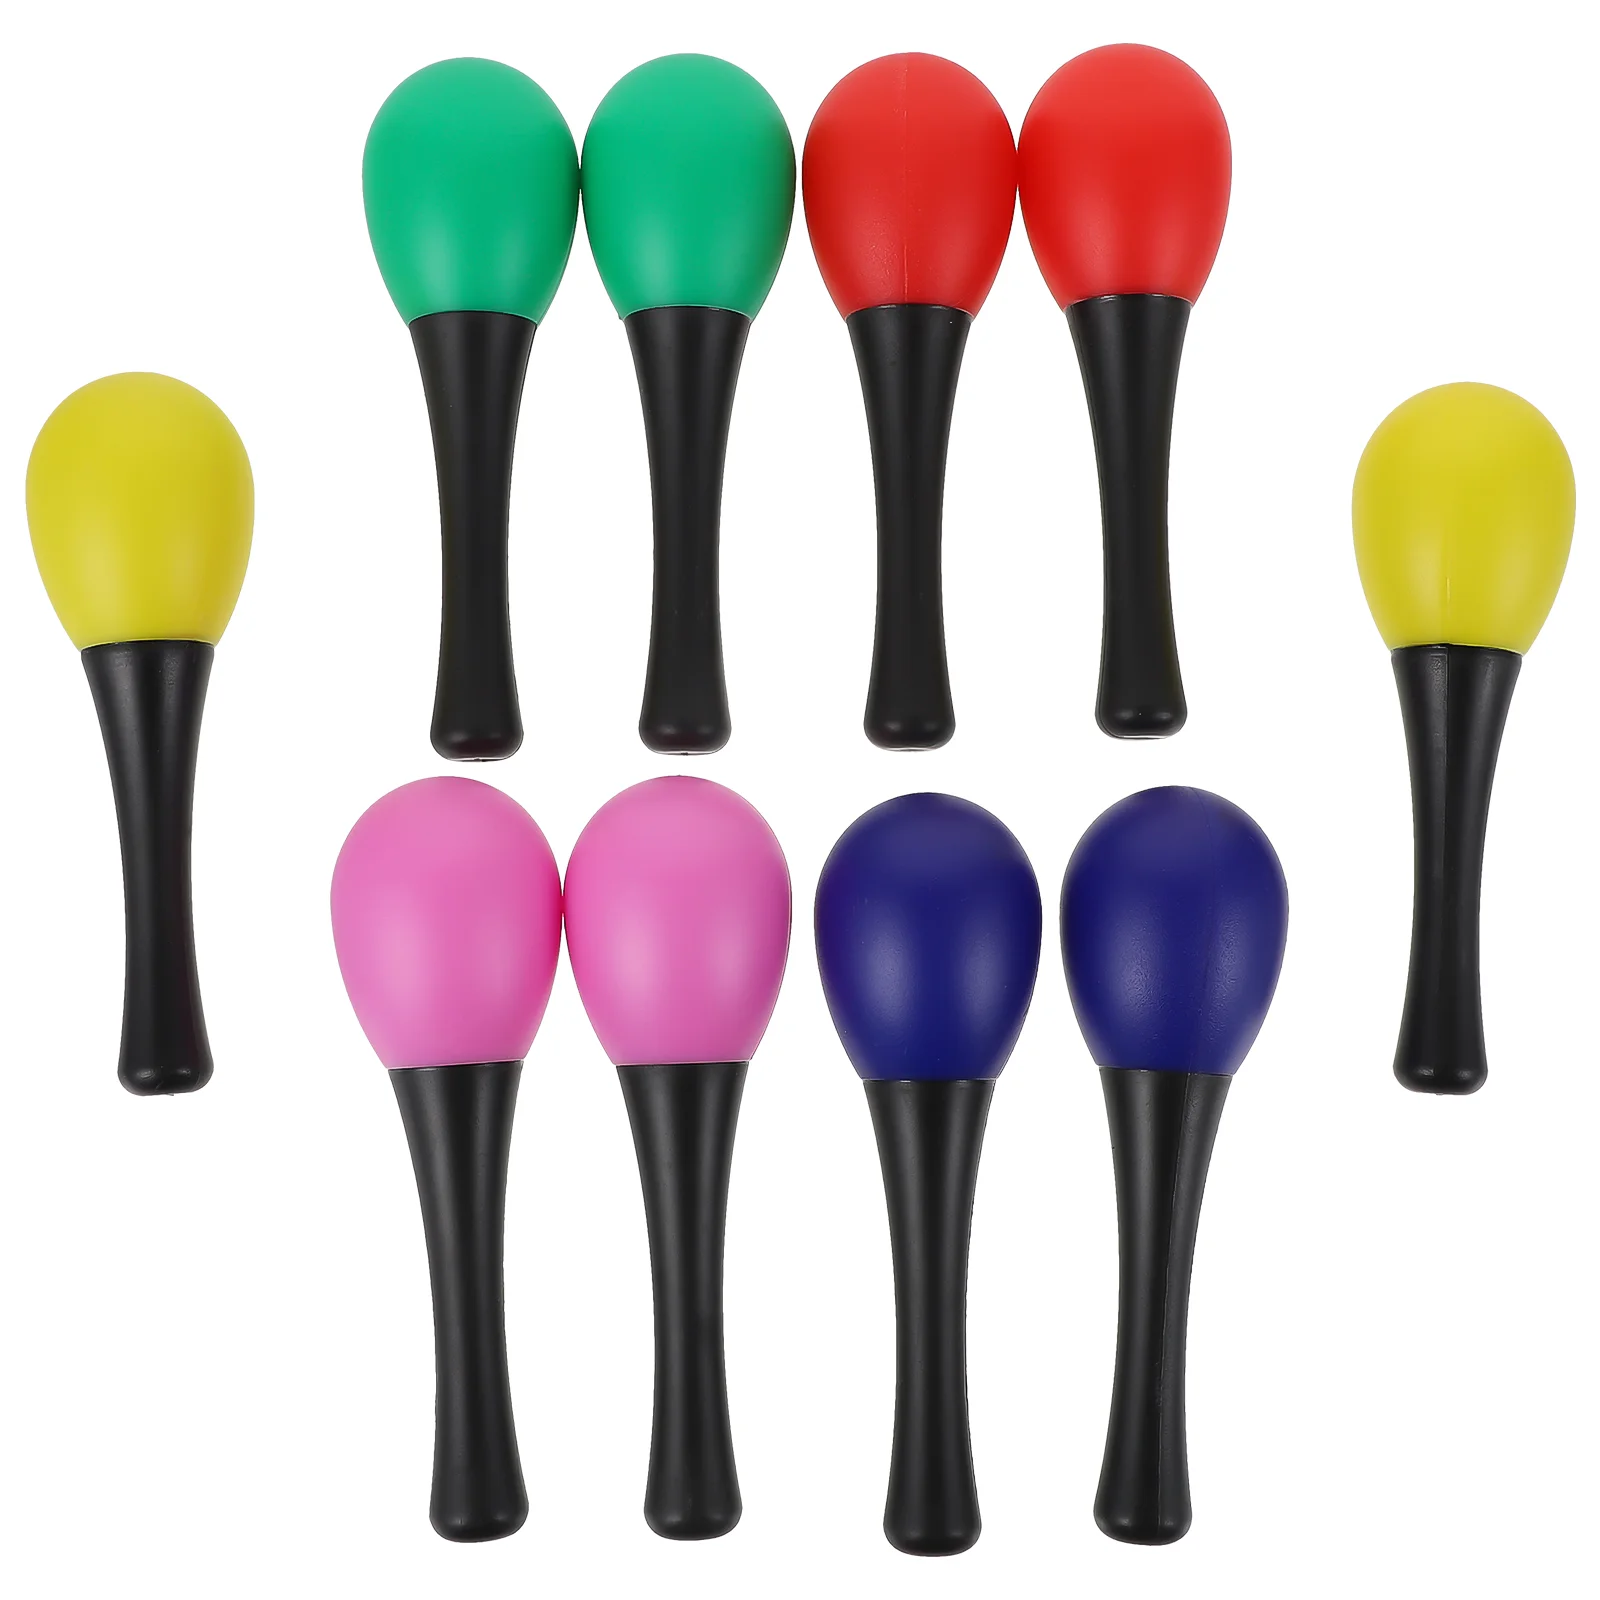 

Orff Maraca Delicate Sand Hammers Kids Percussion Instruments Useful Beating Teaching Props Children Toys Wooden Babies Maracas